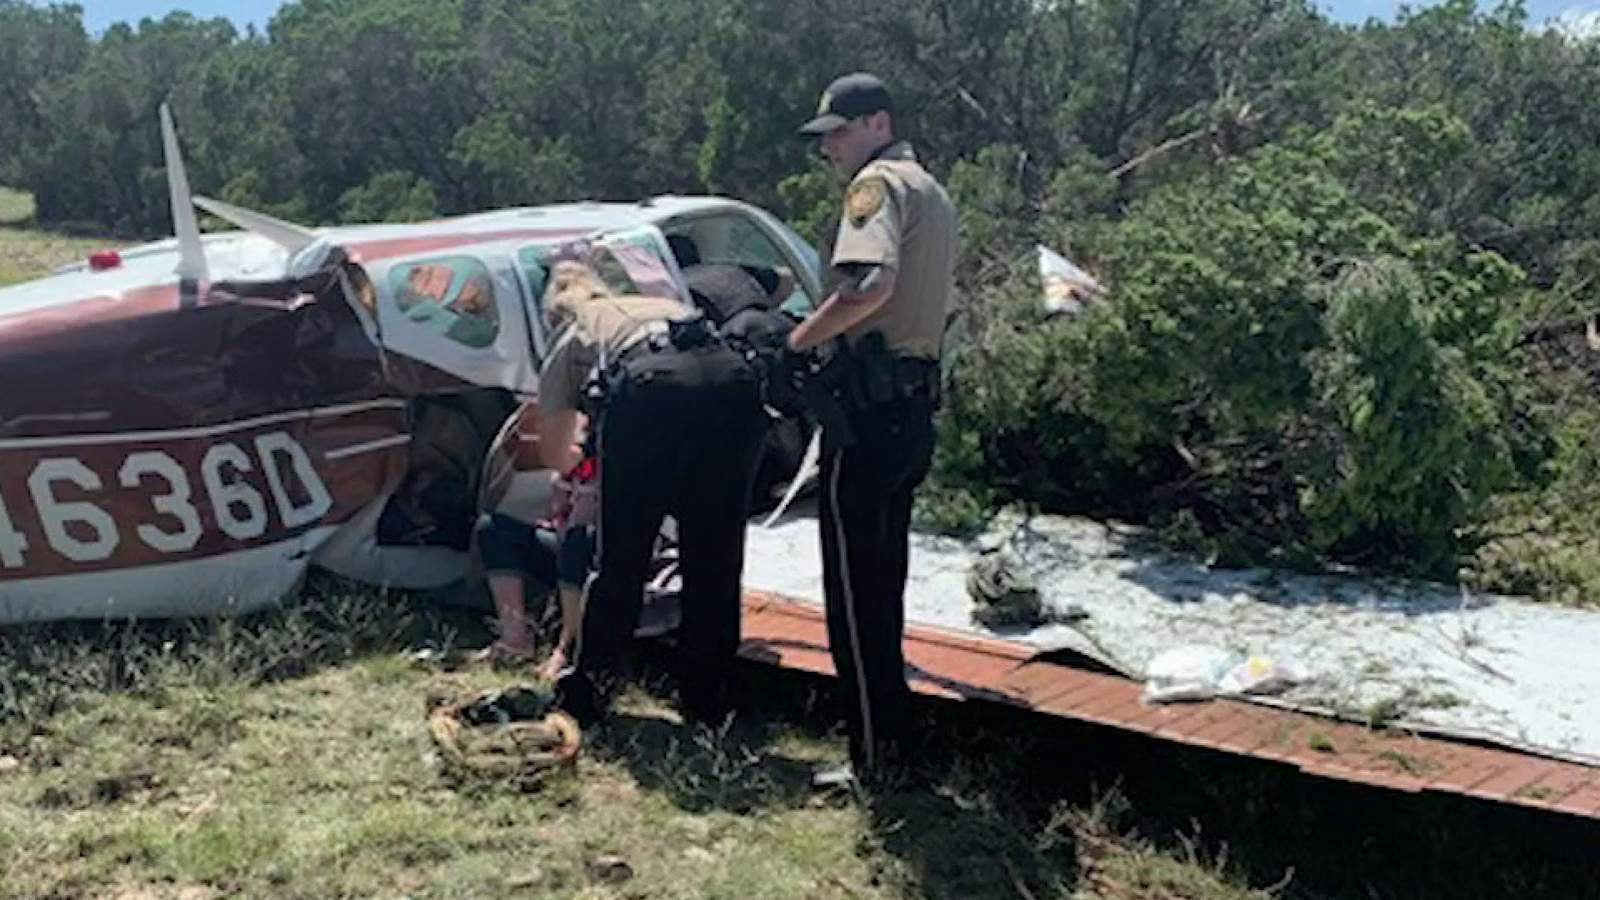 2 adults, 1 child injured in small plane crash north of Canyon Lake